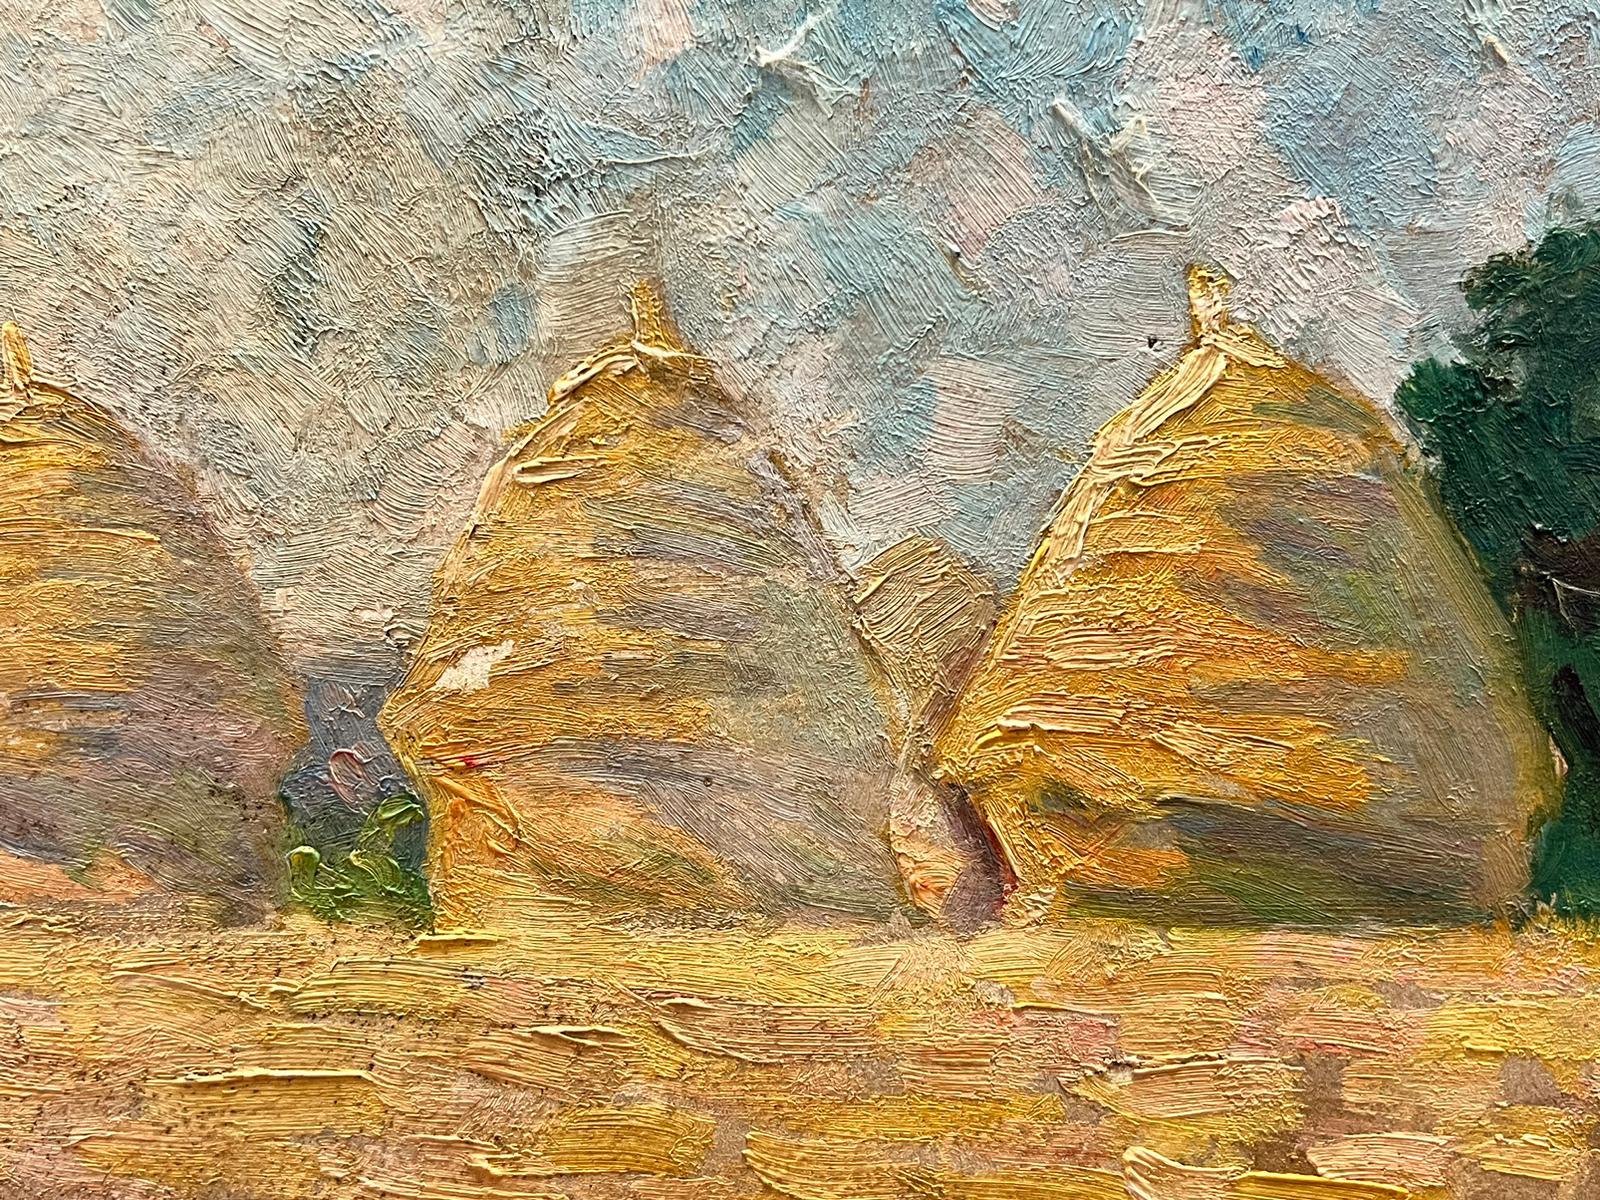 Artist/ School: Suzanne Crochet (French c. 1930), French Impressionist artist

Title: Haystacks

Medium: oil on board, unframed

board: 9.5 x 12 inches

Provenance: private collection, France

Condition: The painting is in overall good and sound